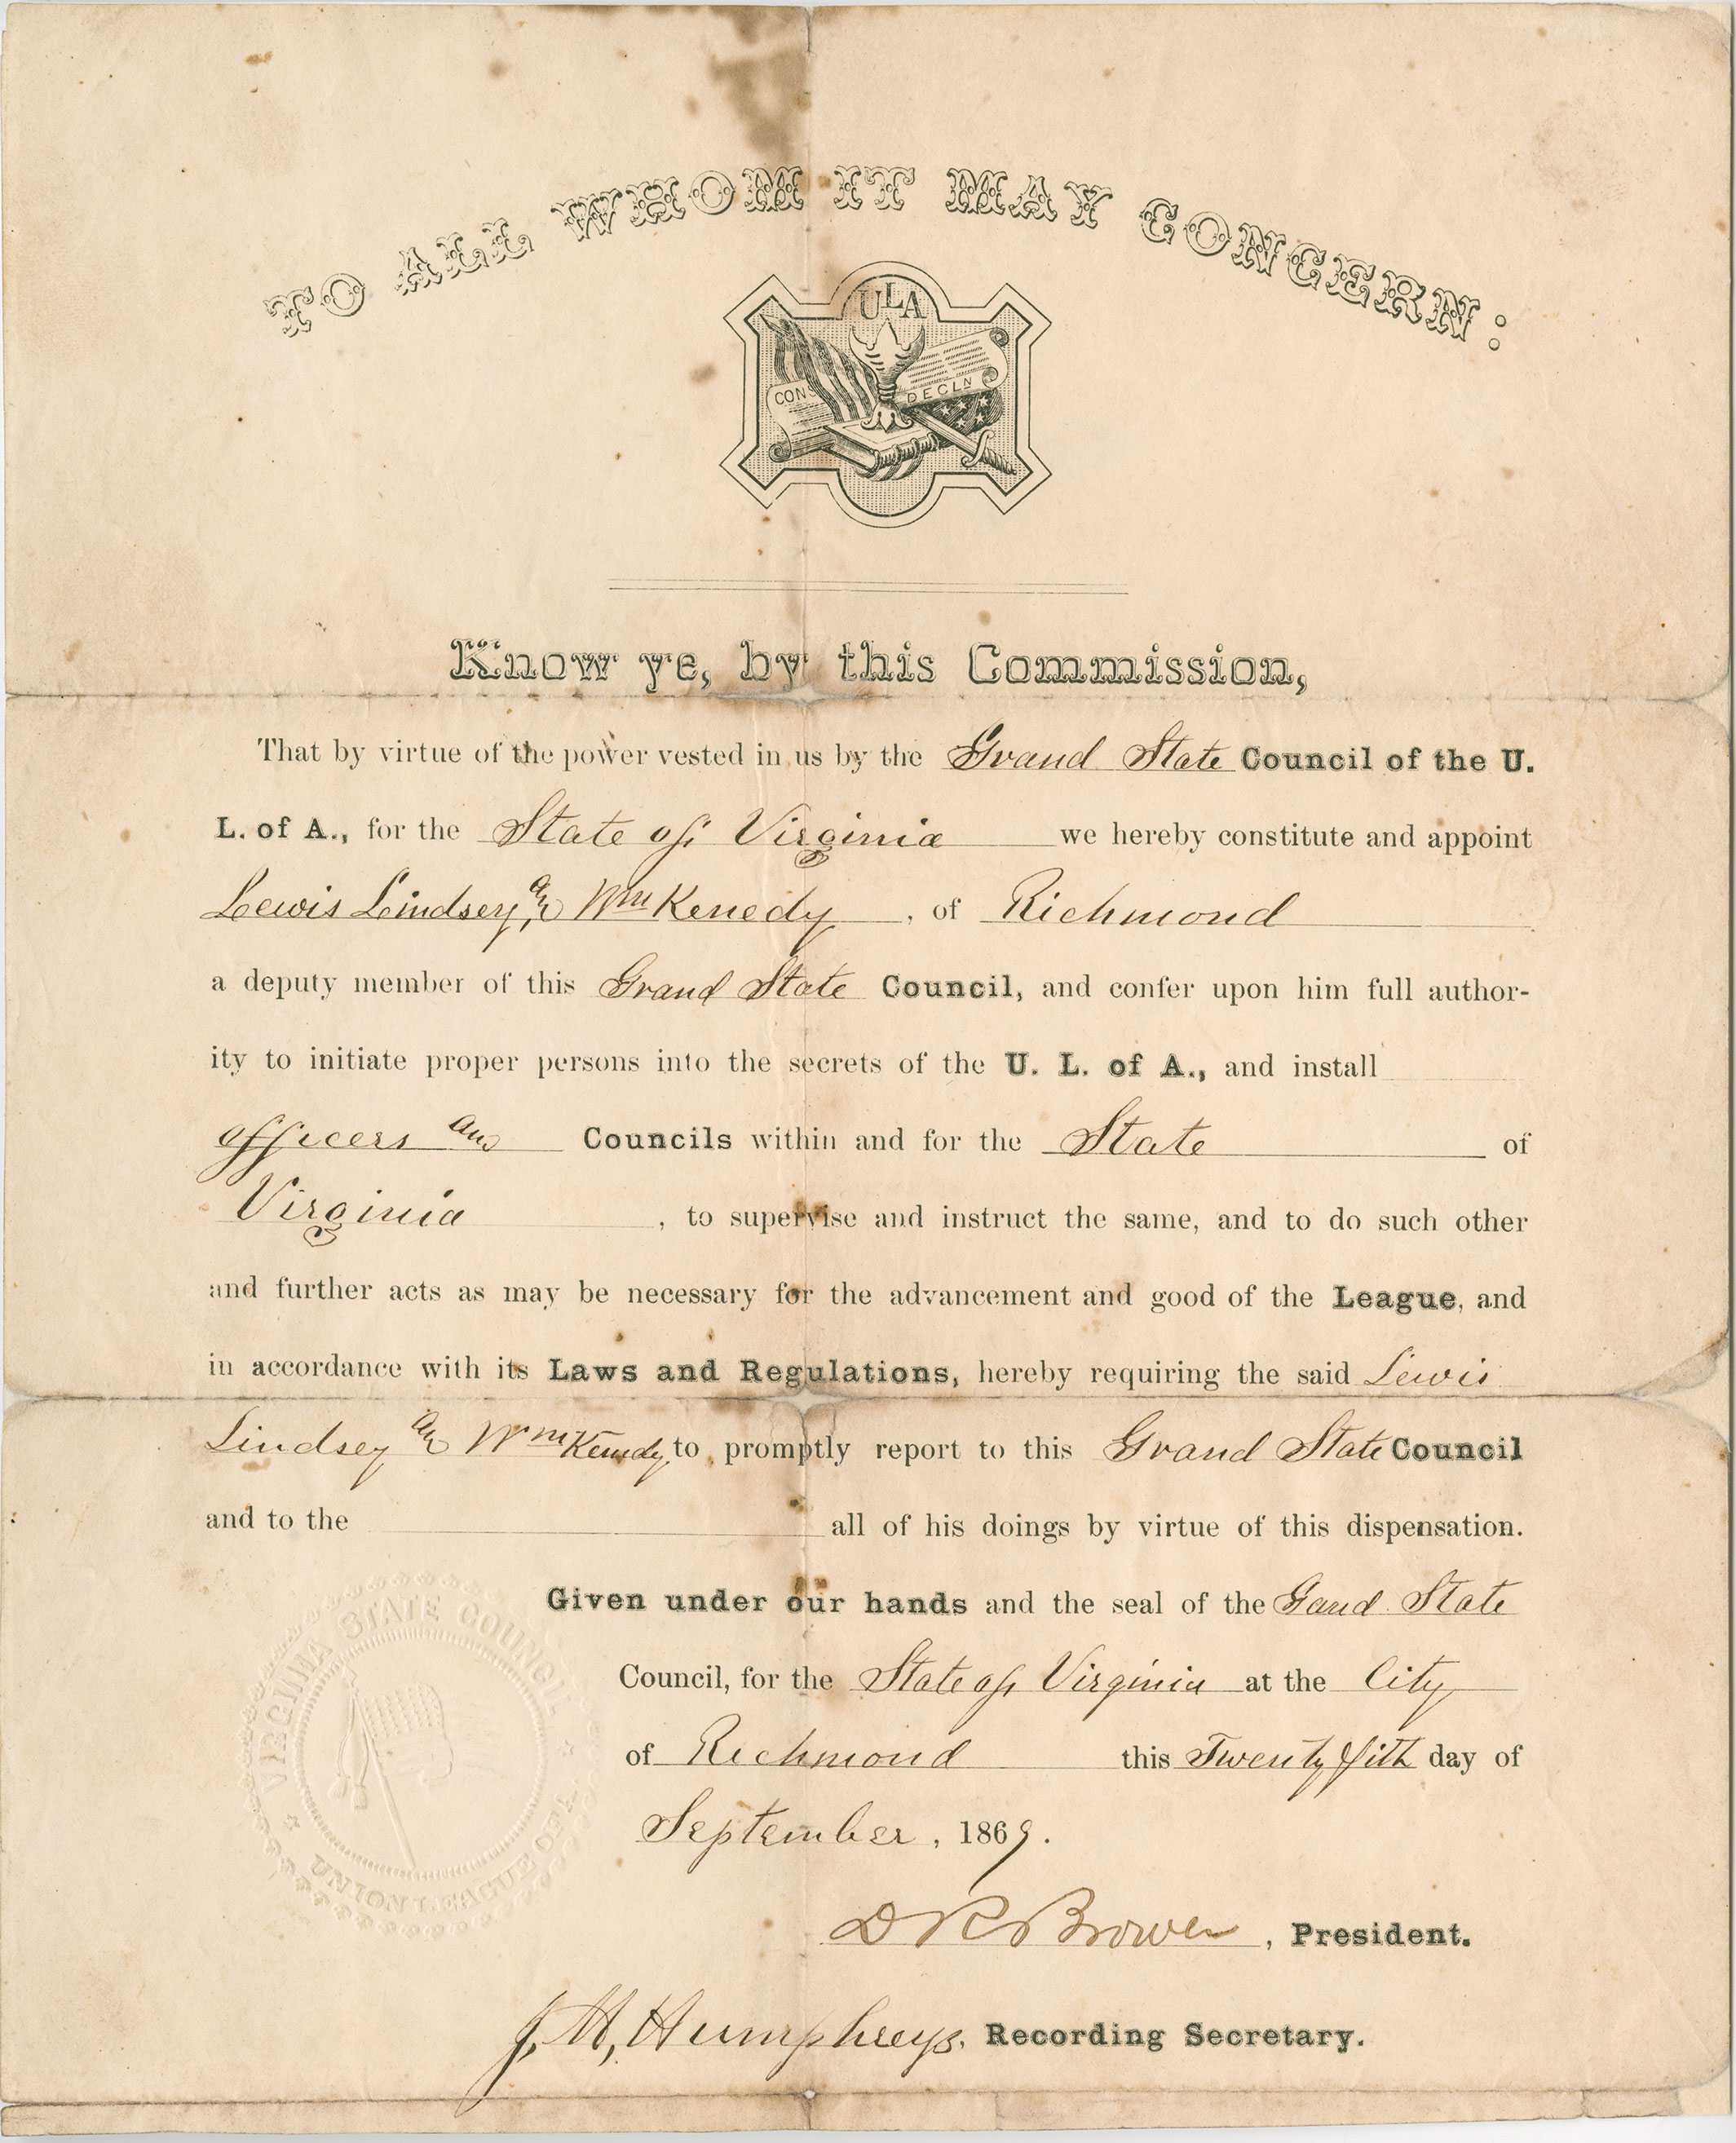 Printed paper document with handwritten additions reading "TO ALL WHOM IT MAY CONCERN: Know ye, by this Commission, That by virtue of the power vested in us by the Grand State Council of the U. L. of A., for the State. to of Virginia. of we hereby constitute and appoint Richmond a deputy member of this Grand State Council, and confer upon him full author- ity to initiate proper persons into the secrets of the U. L. of A., and install Councils within and for the State Virginia. of to supervise and instruct the same, and to do such other and further acts as may be necessary for the advancement and good of the League, and in accordance with its Laws and Regulations, hereby requiring the said Lewis. Lindsey kady to promptly report to this Grand State Council and to the all of his doings by virtue of this dispensation. Given under our hands and the seal of the Sand State Council, for the State of Virginia lity at the Ci of Richmond this Twenty Yith day of September. 1867. Brower, President. H. Humphreys. Recording Secretary."